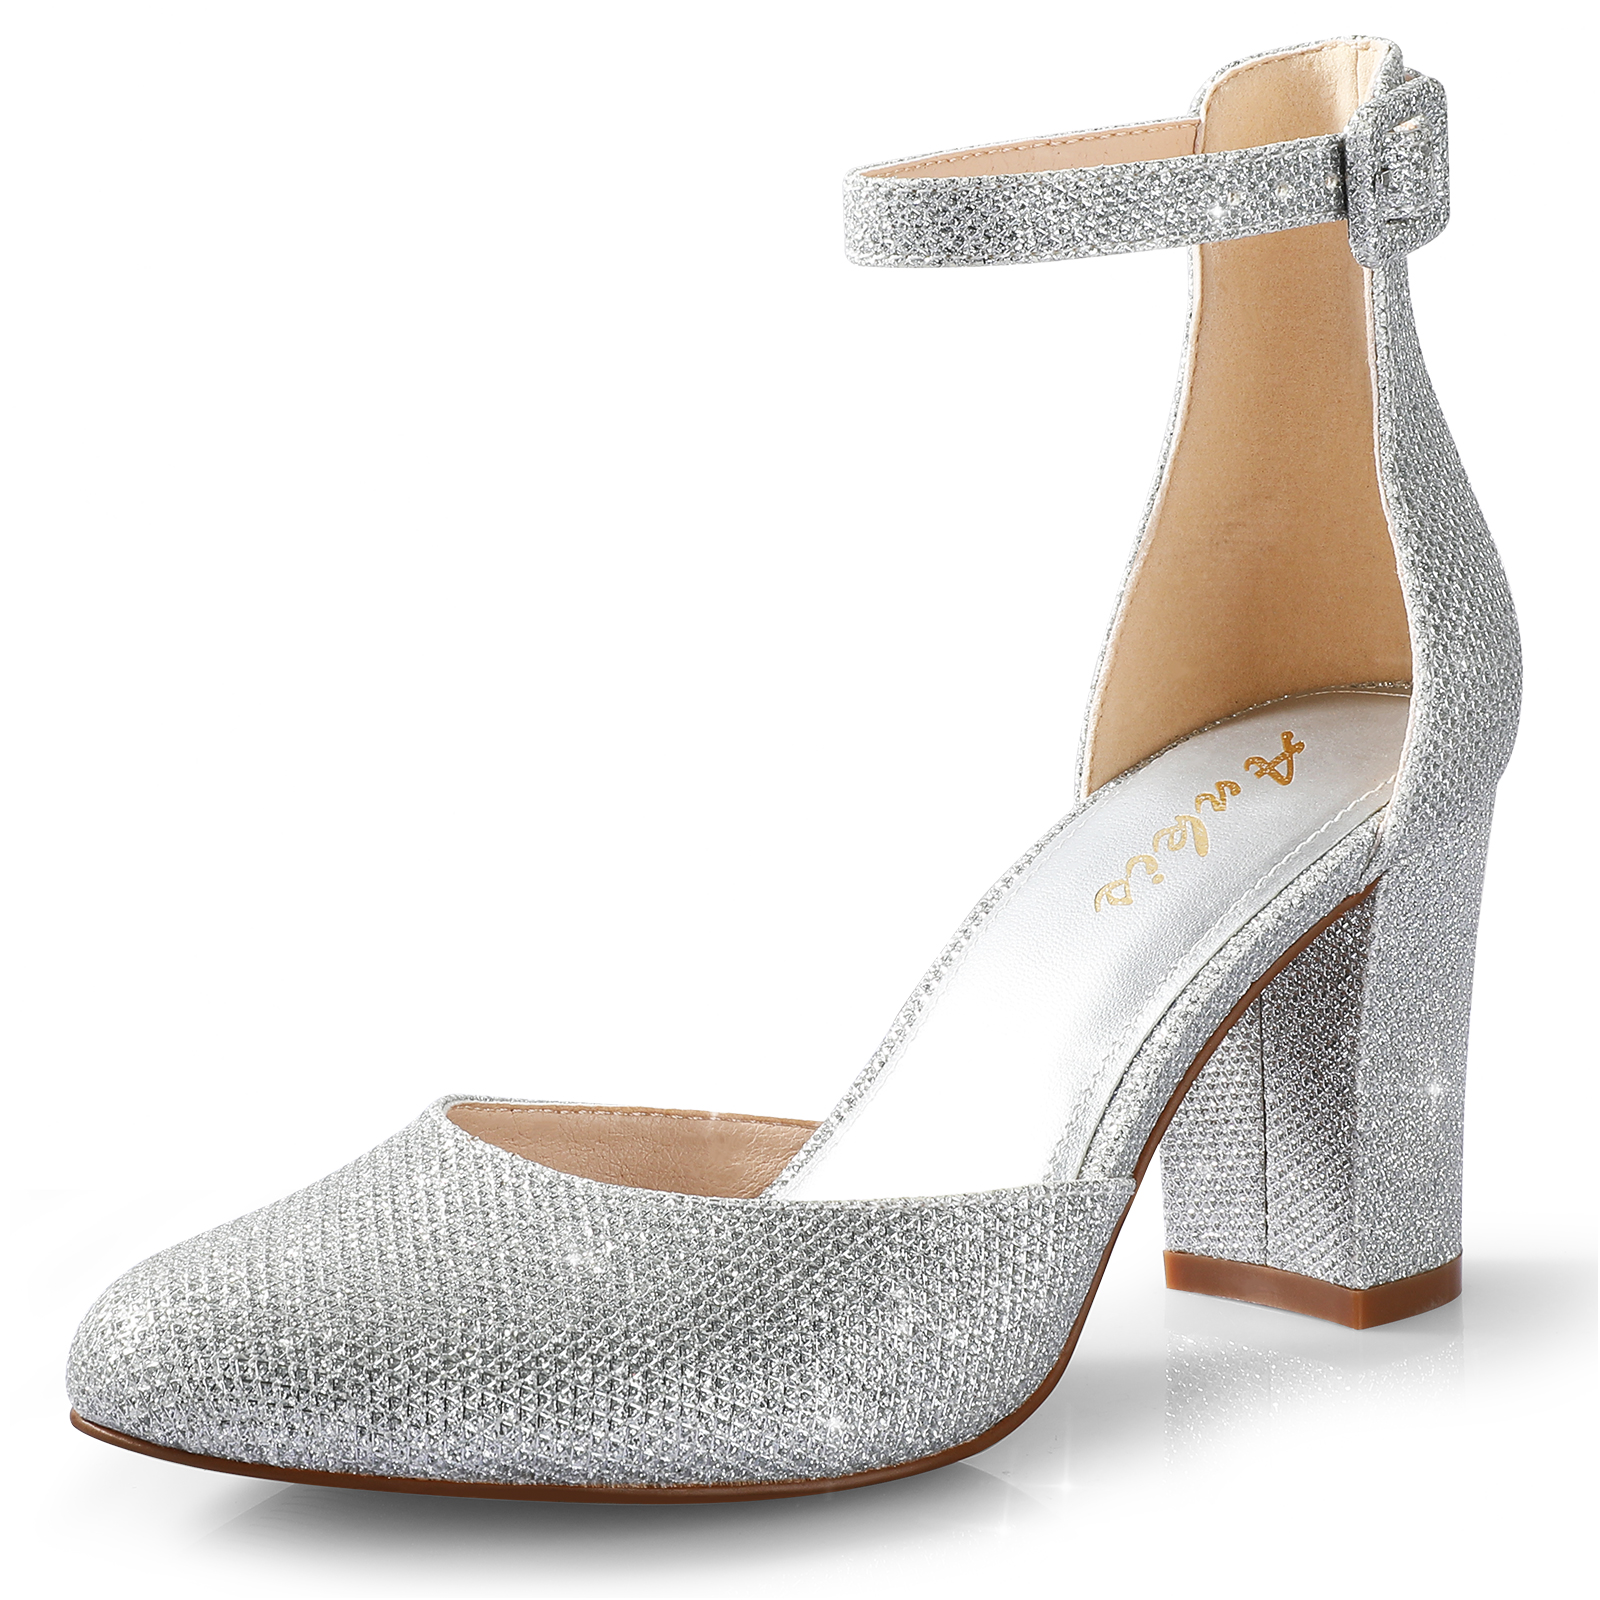 Ankis 3 Inch Closed Toe Heels for Women - Silver